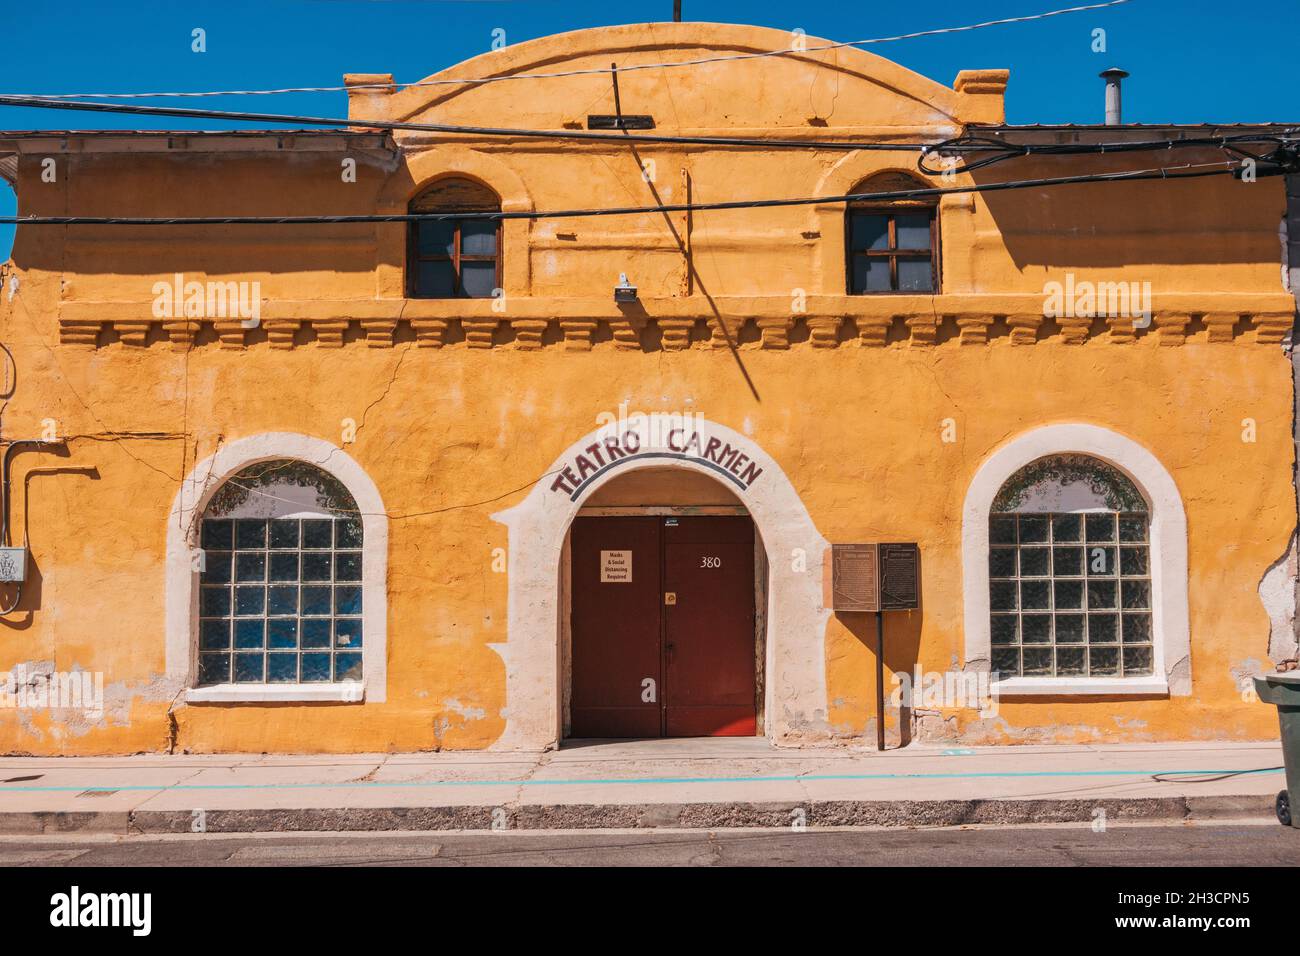 The front view of Teatro Carmen, an historic theater built in 1915 in what is now Barrio Viejo (Old Neighborhood) in Tucson, Arizona Stock Photo